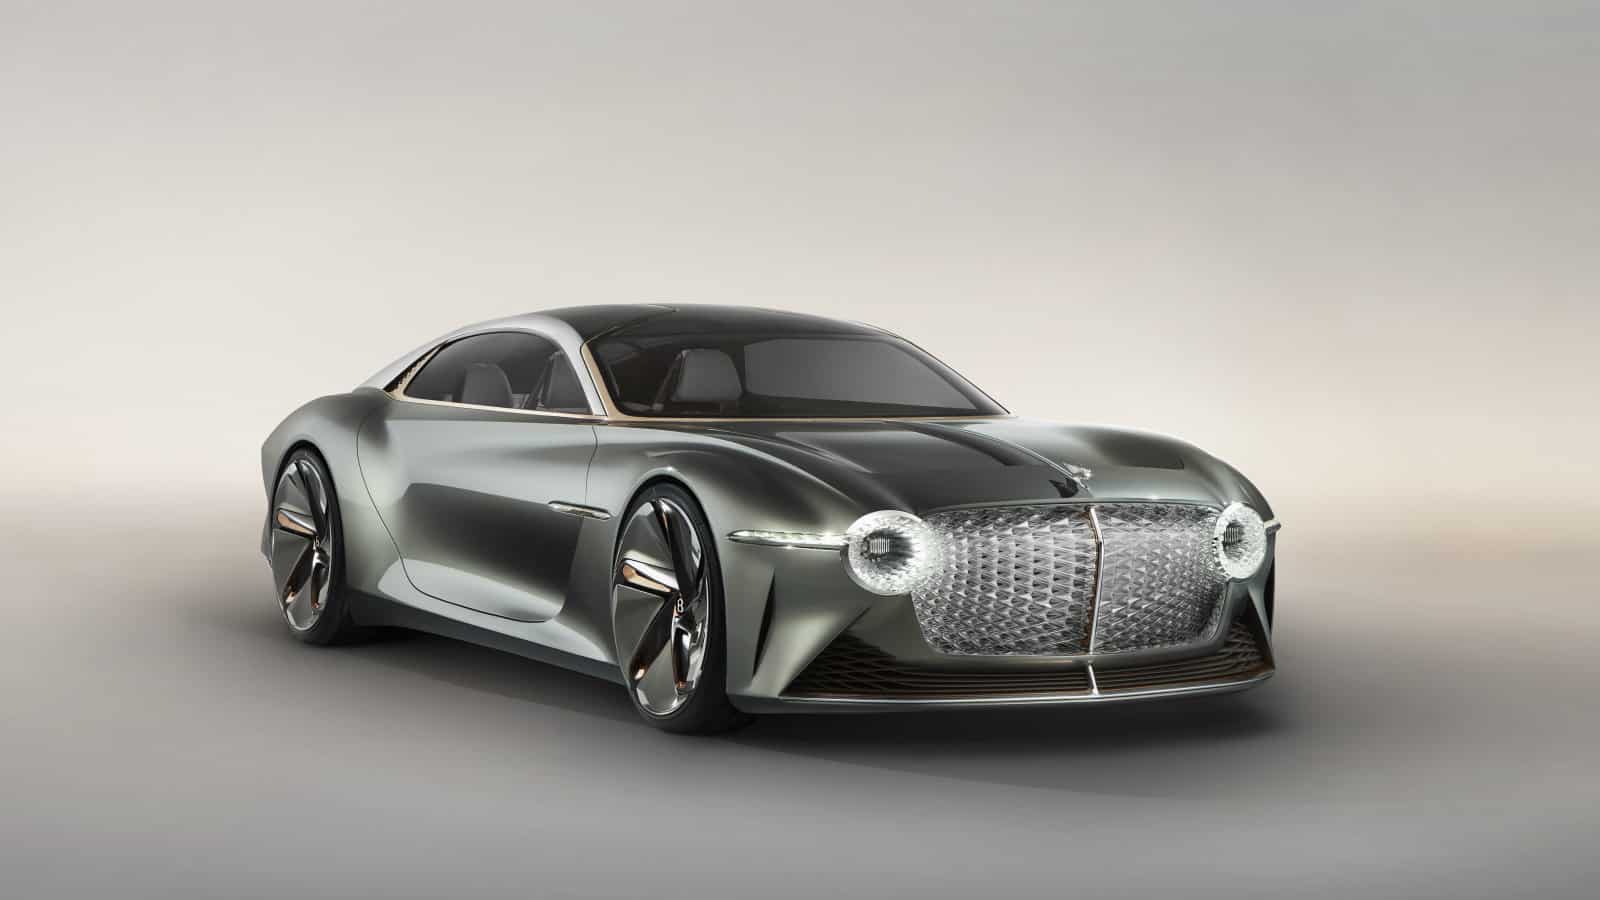 Bentley's first electric car to debut in 2025